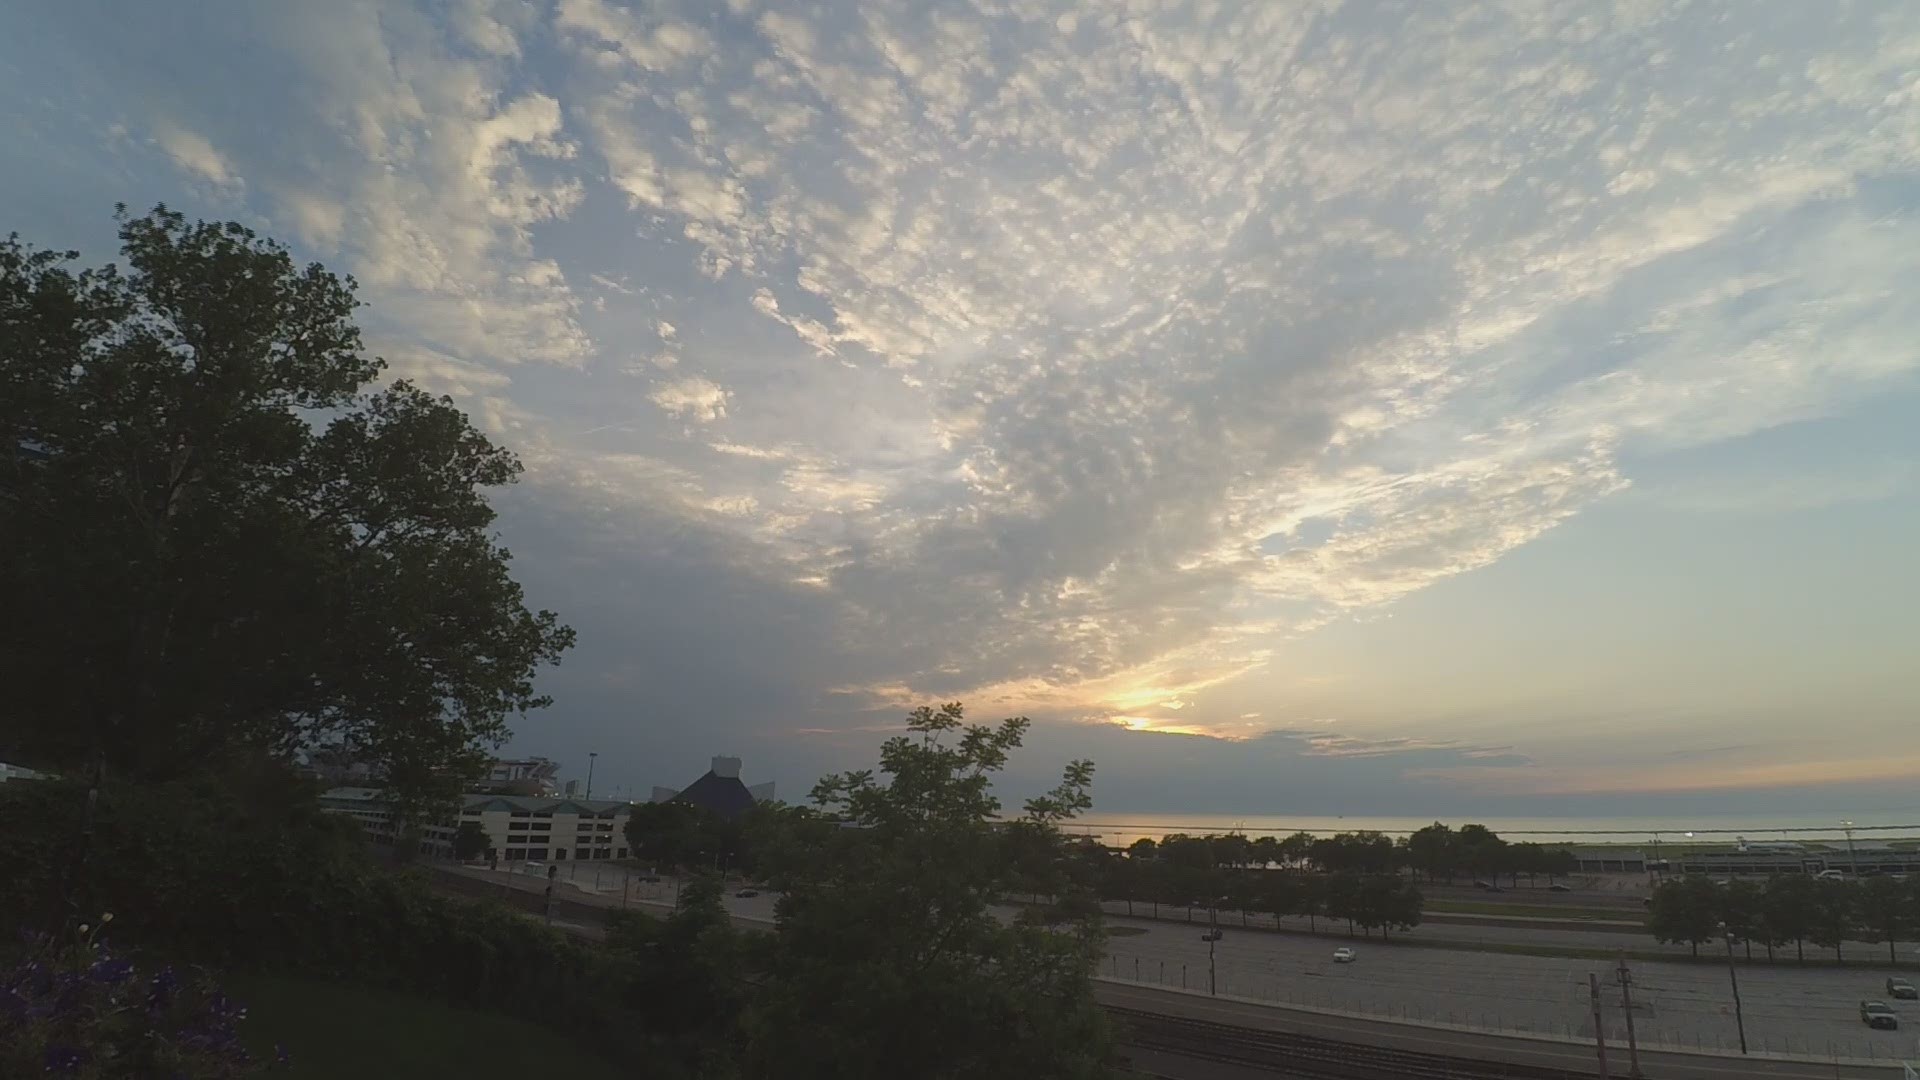 Enjoy our Friday evening time lapse #3weather